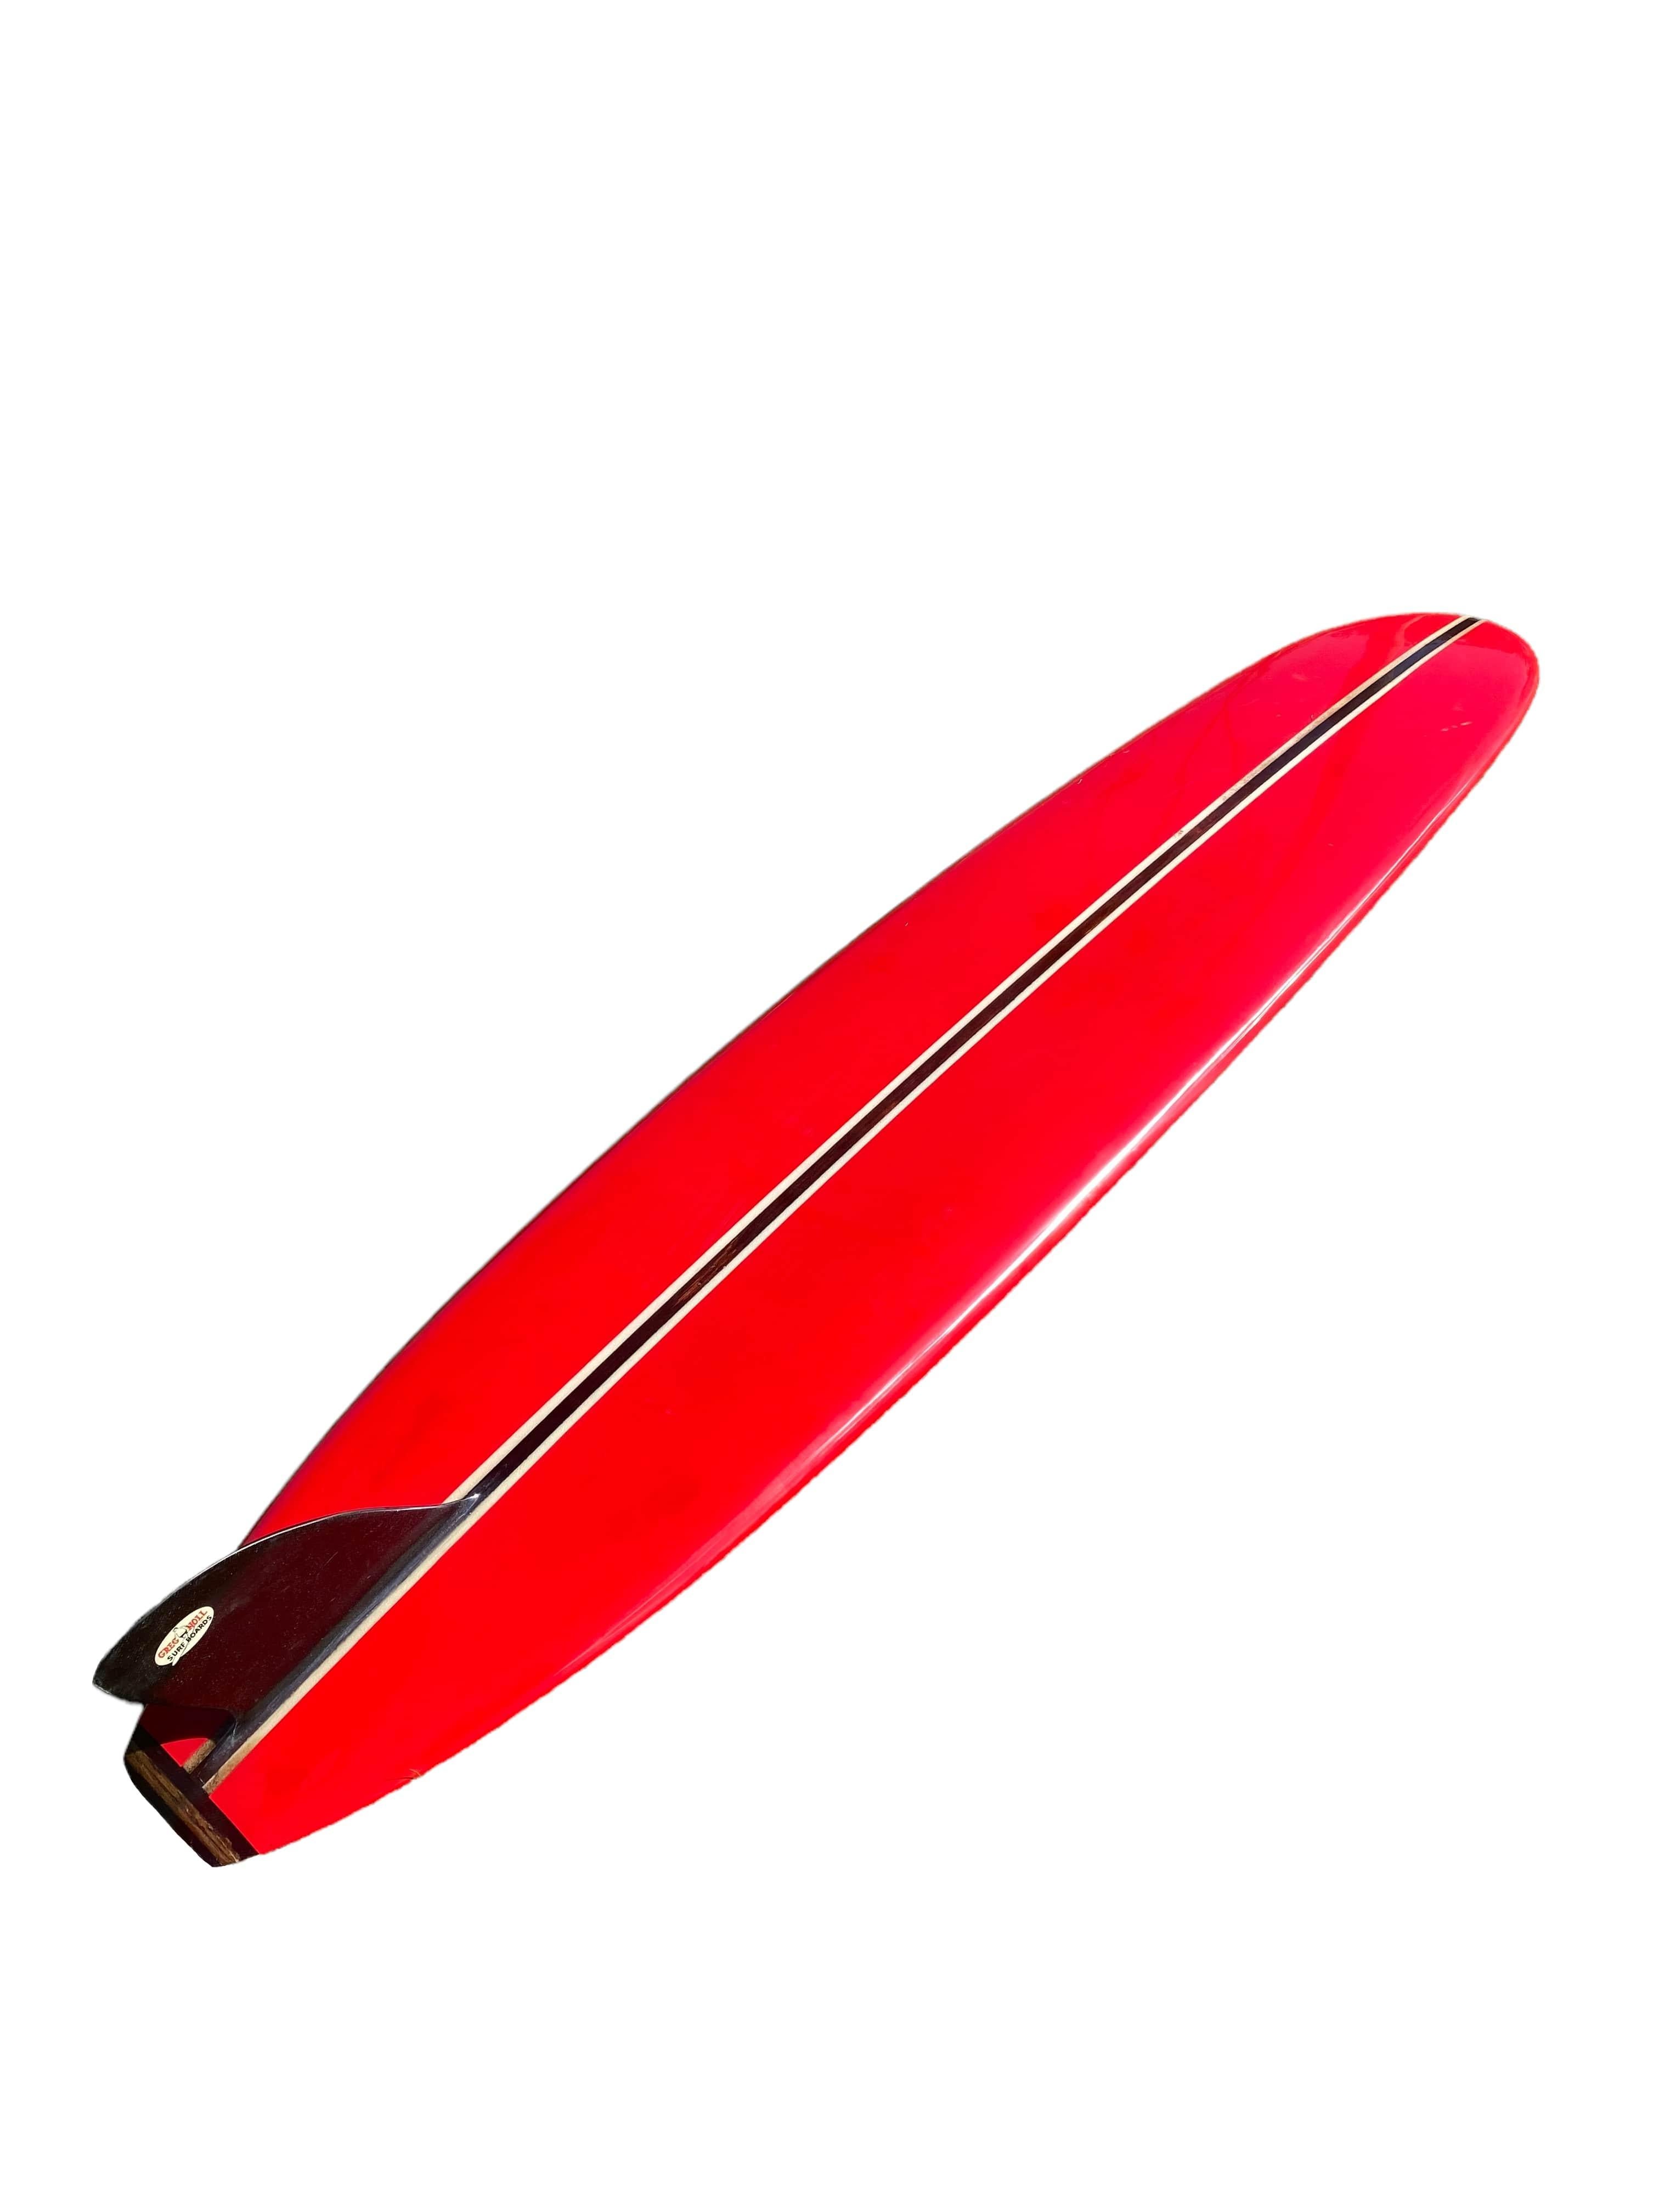 1960s Vintage Greg Noll classic longboard made between 1963-1964. Features gorgeous yellow panels and red wrapped rails with matching accents. Redwood single stringer with multi-piece wood tail block complimented by a sleek black D-fin. A remarkable